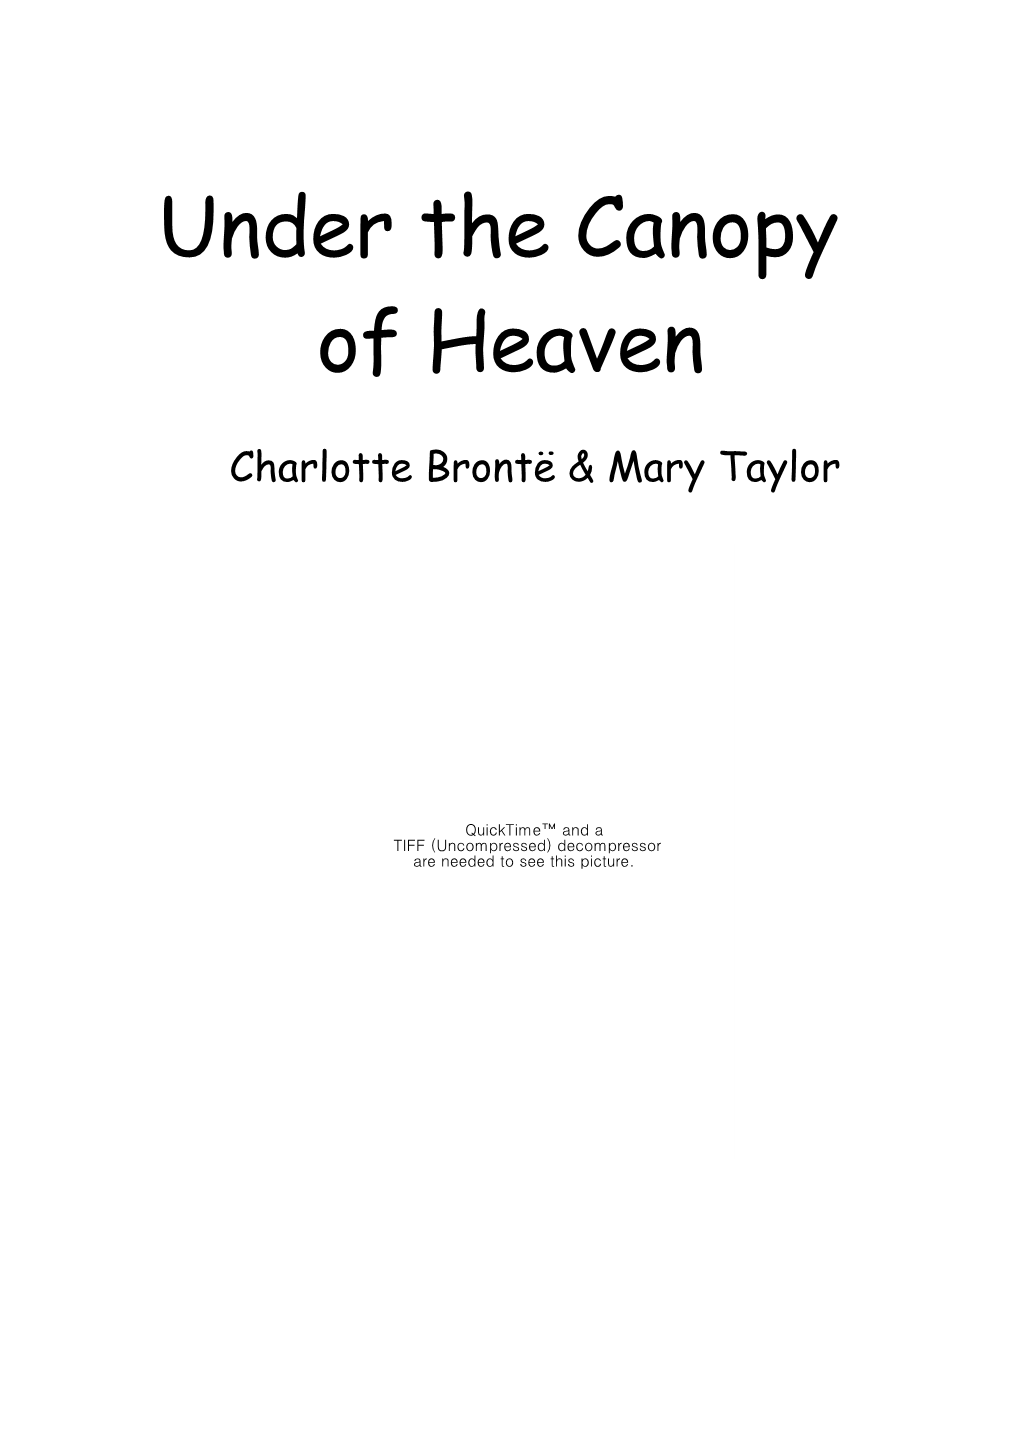 Under the Canopy of Heaven